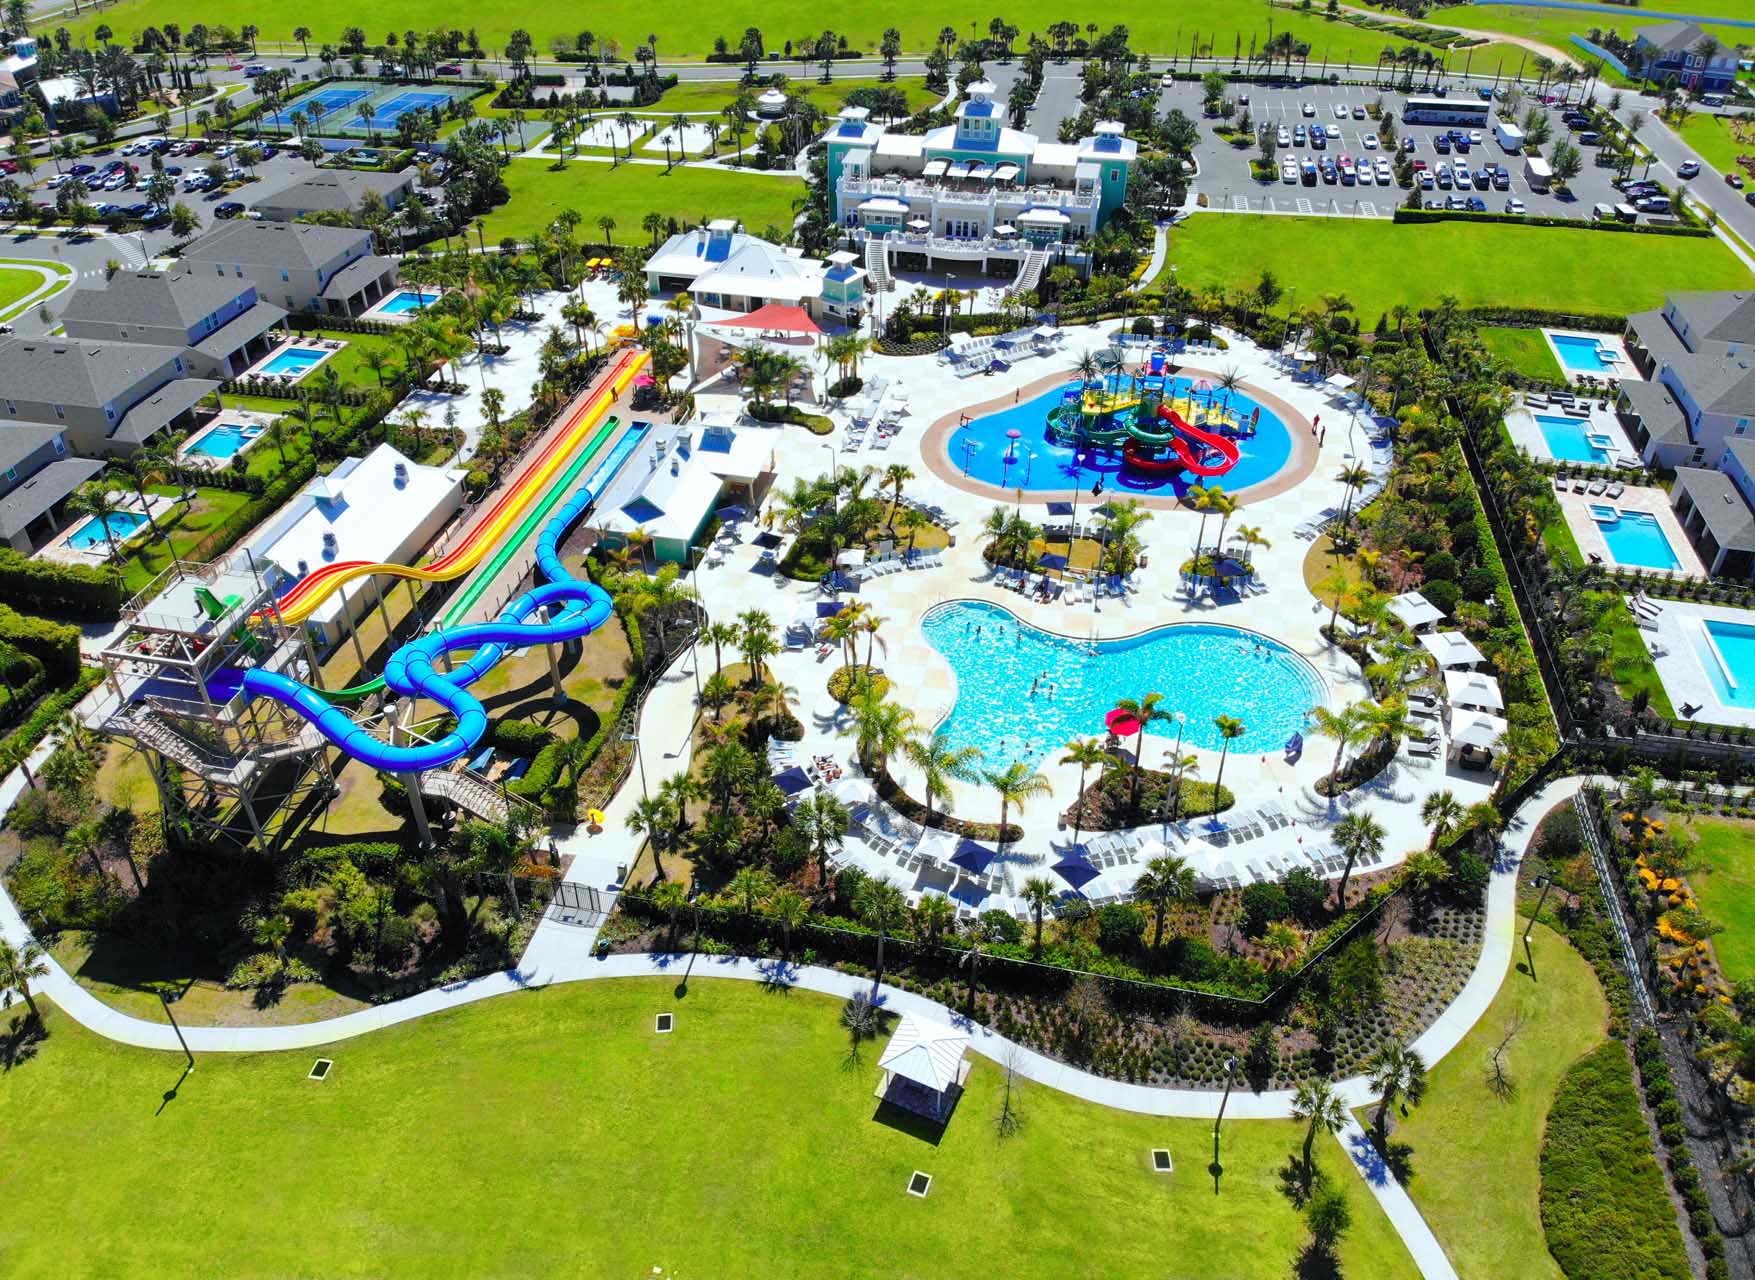 View of the water park, pool, and clubhouse at Encore Resort